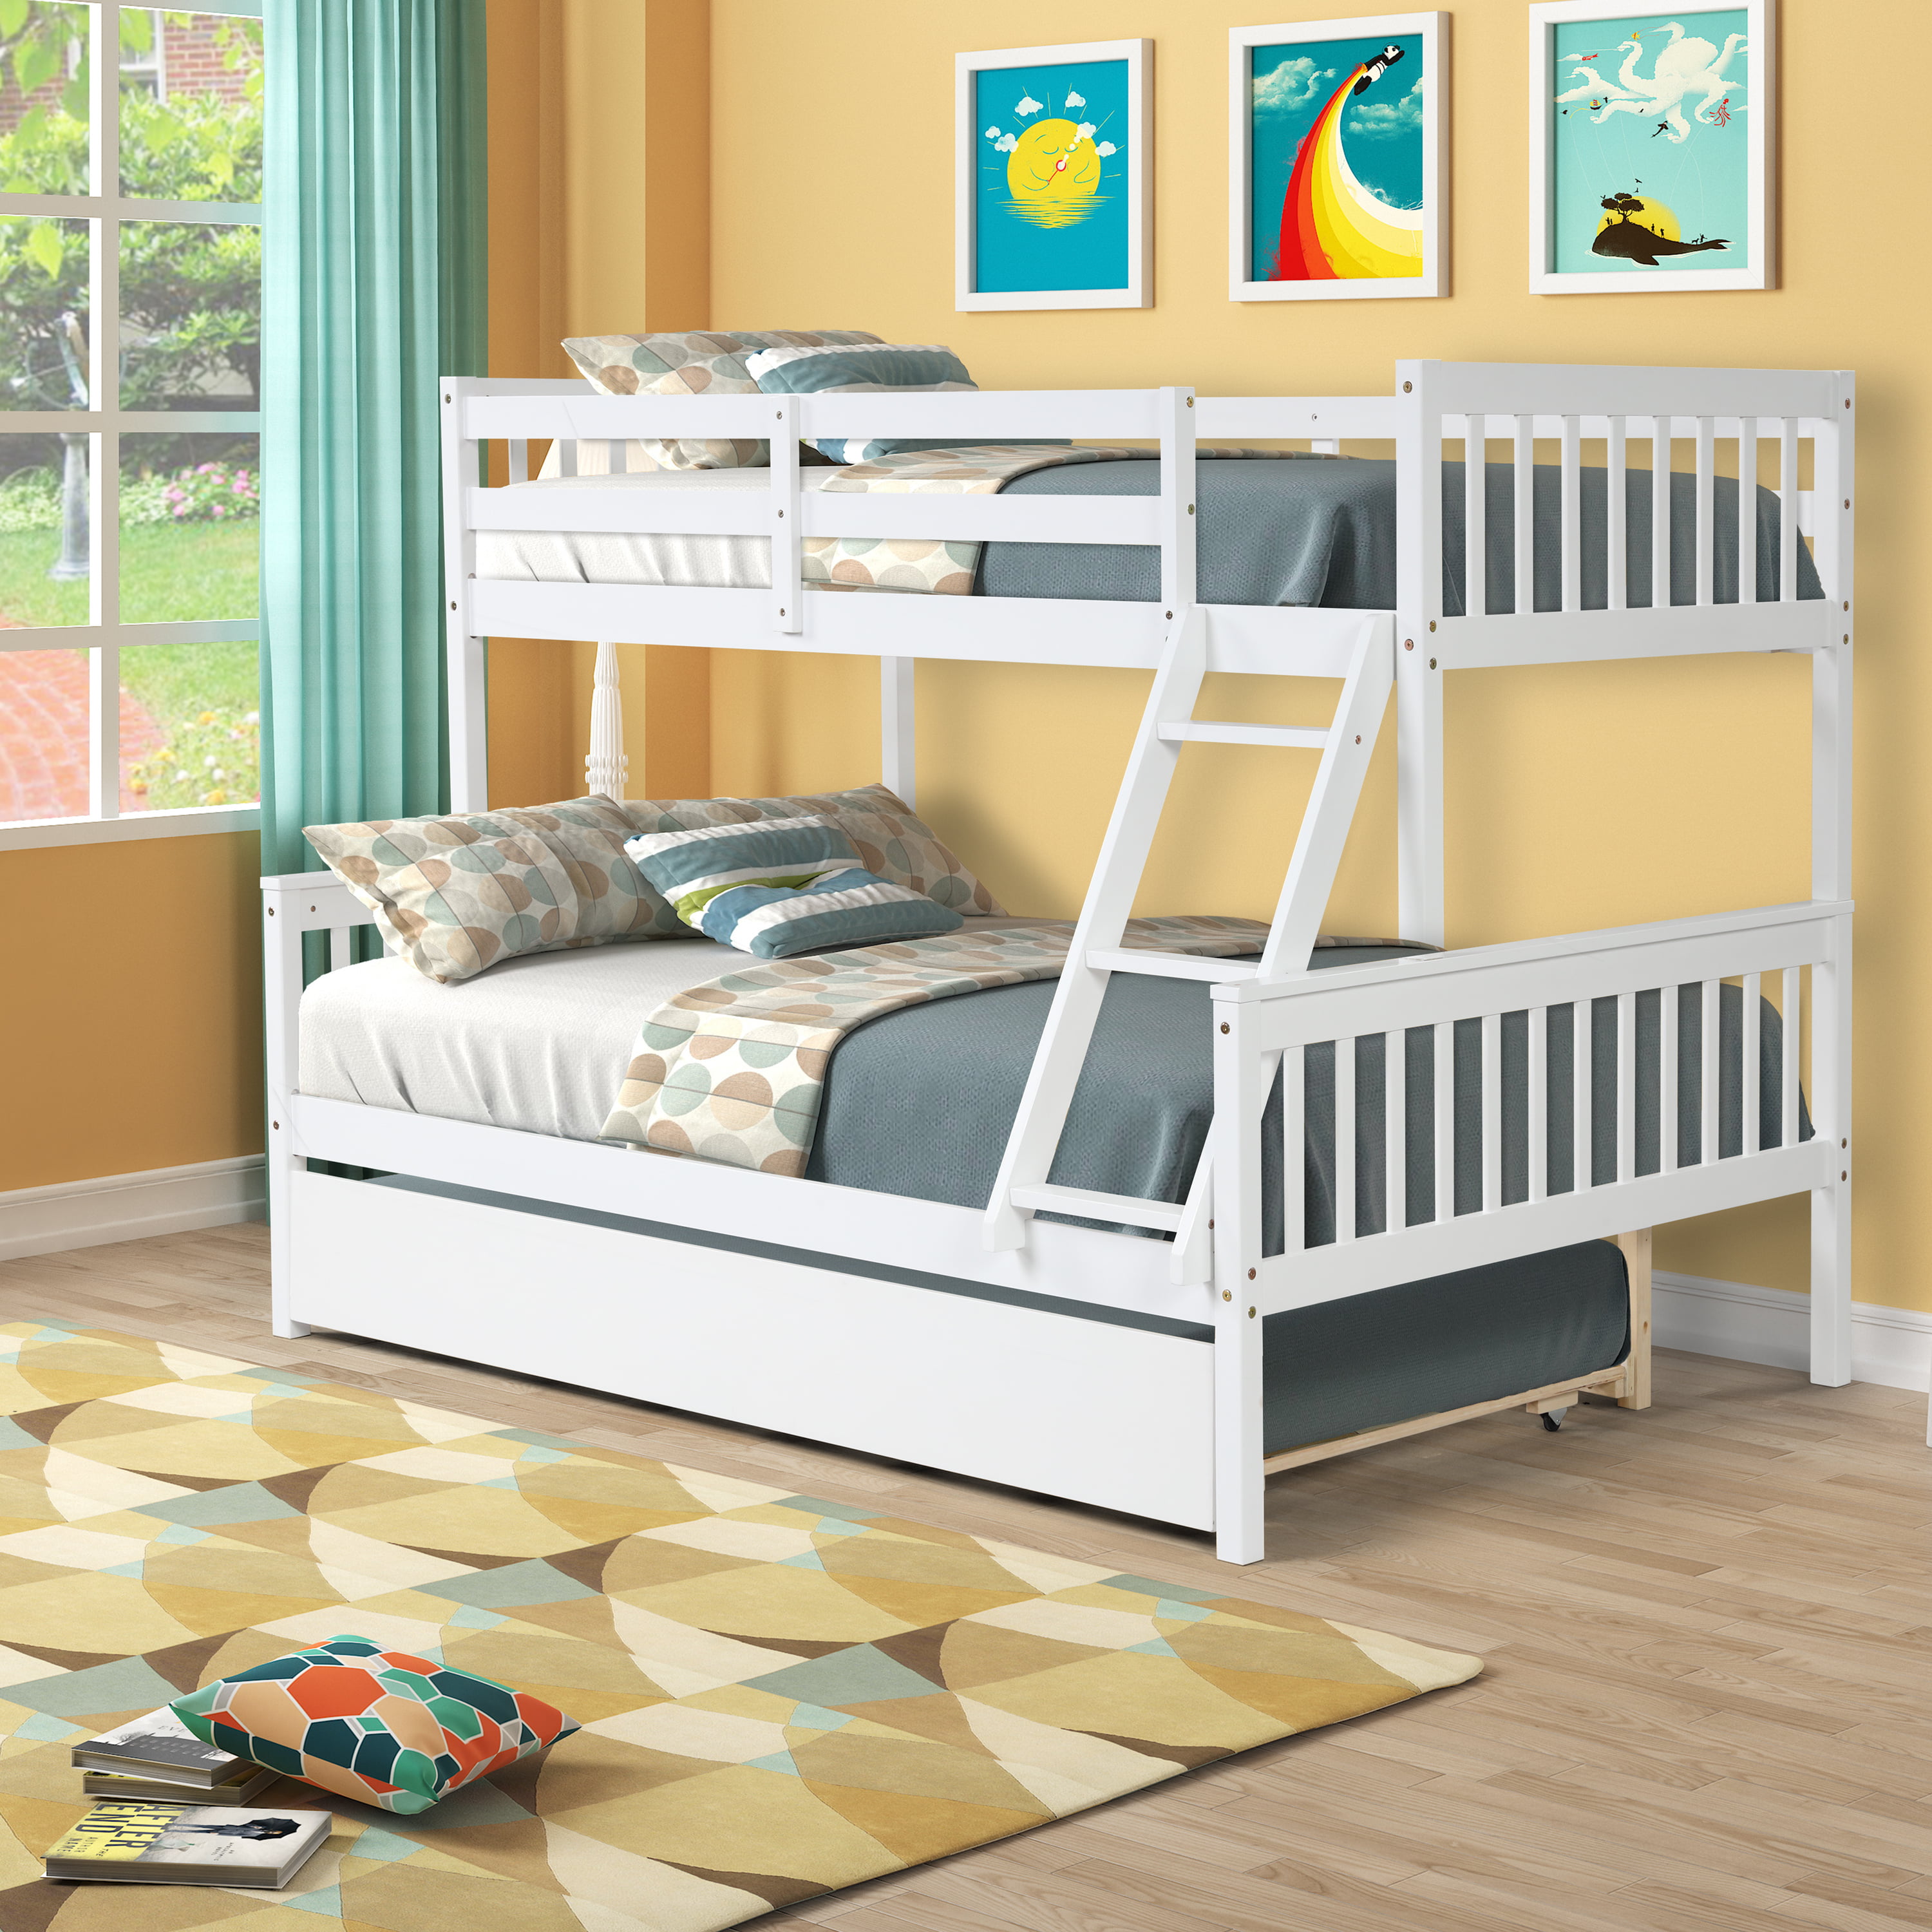 Kids Bunk Beds With Ladder, Wayfair Twin Over Full Bunk Bed With Trundle